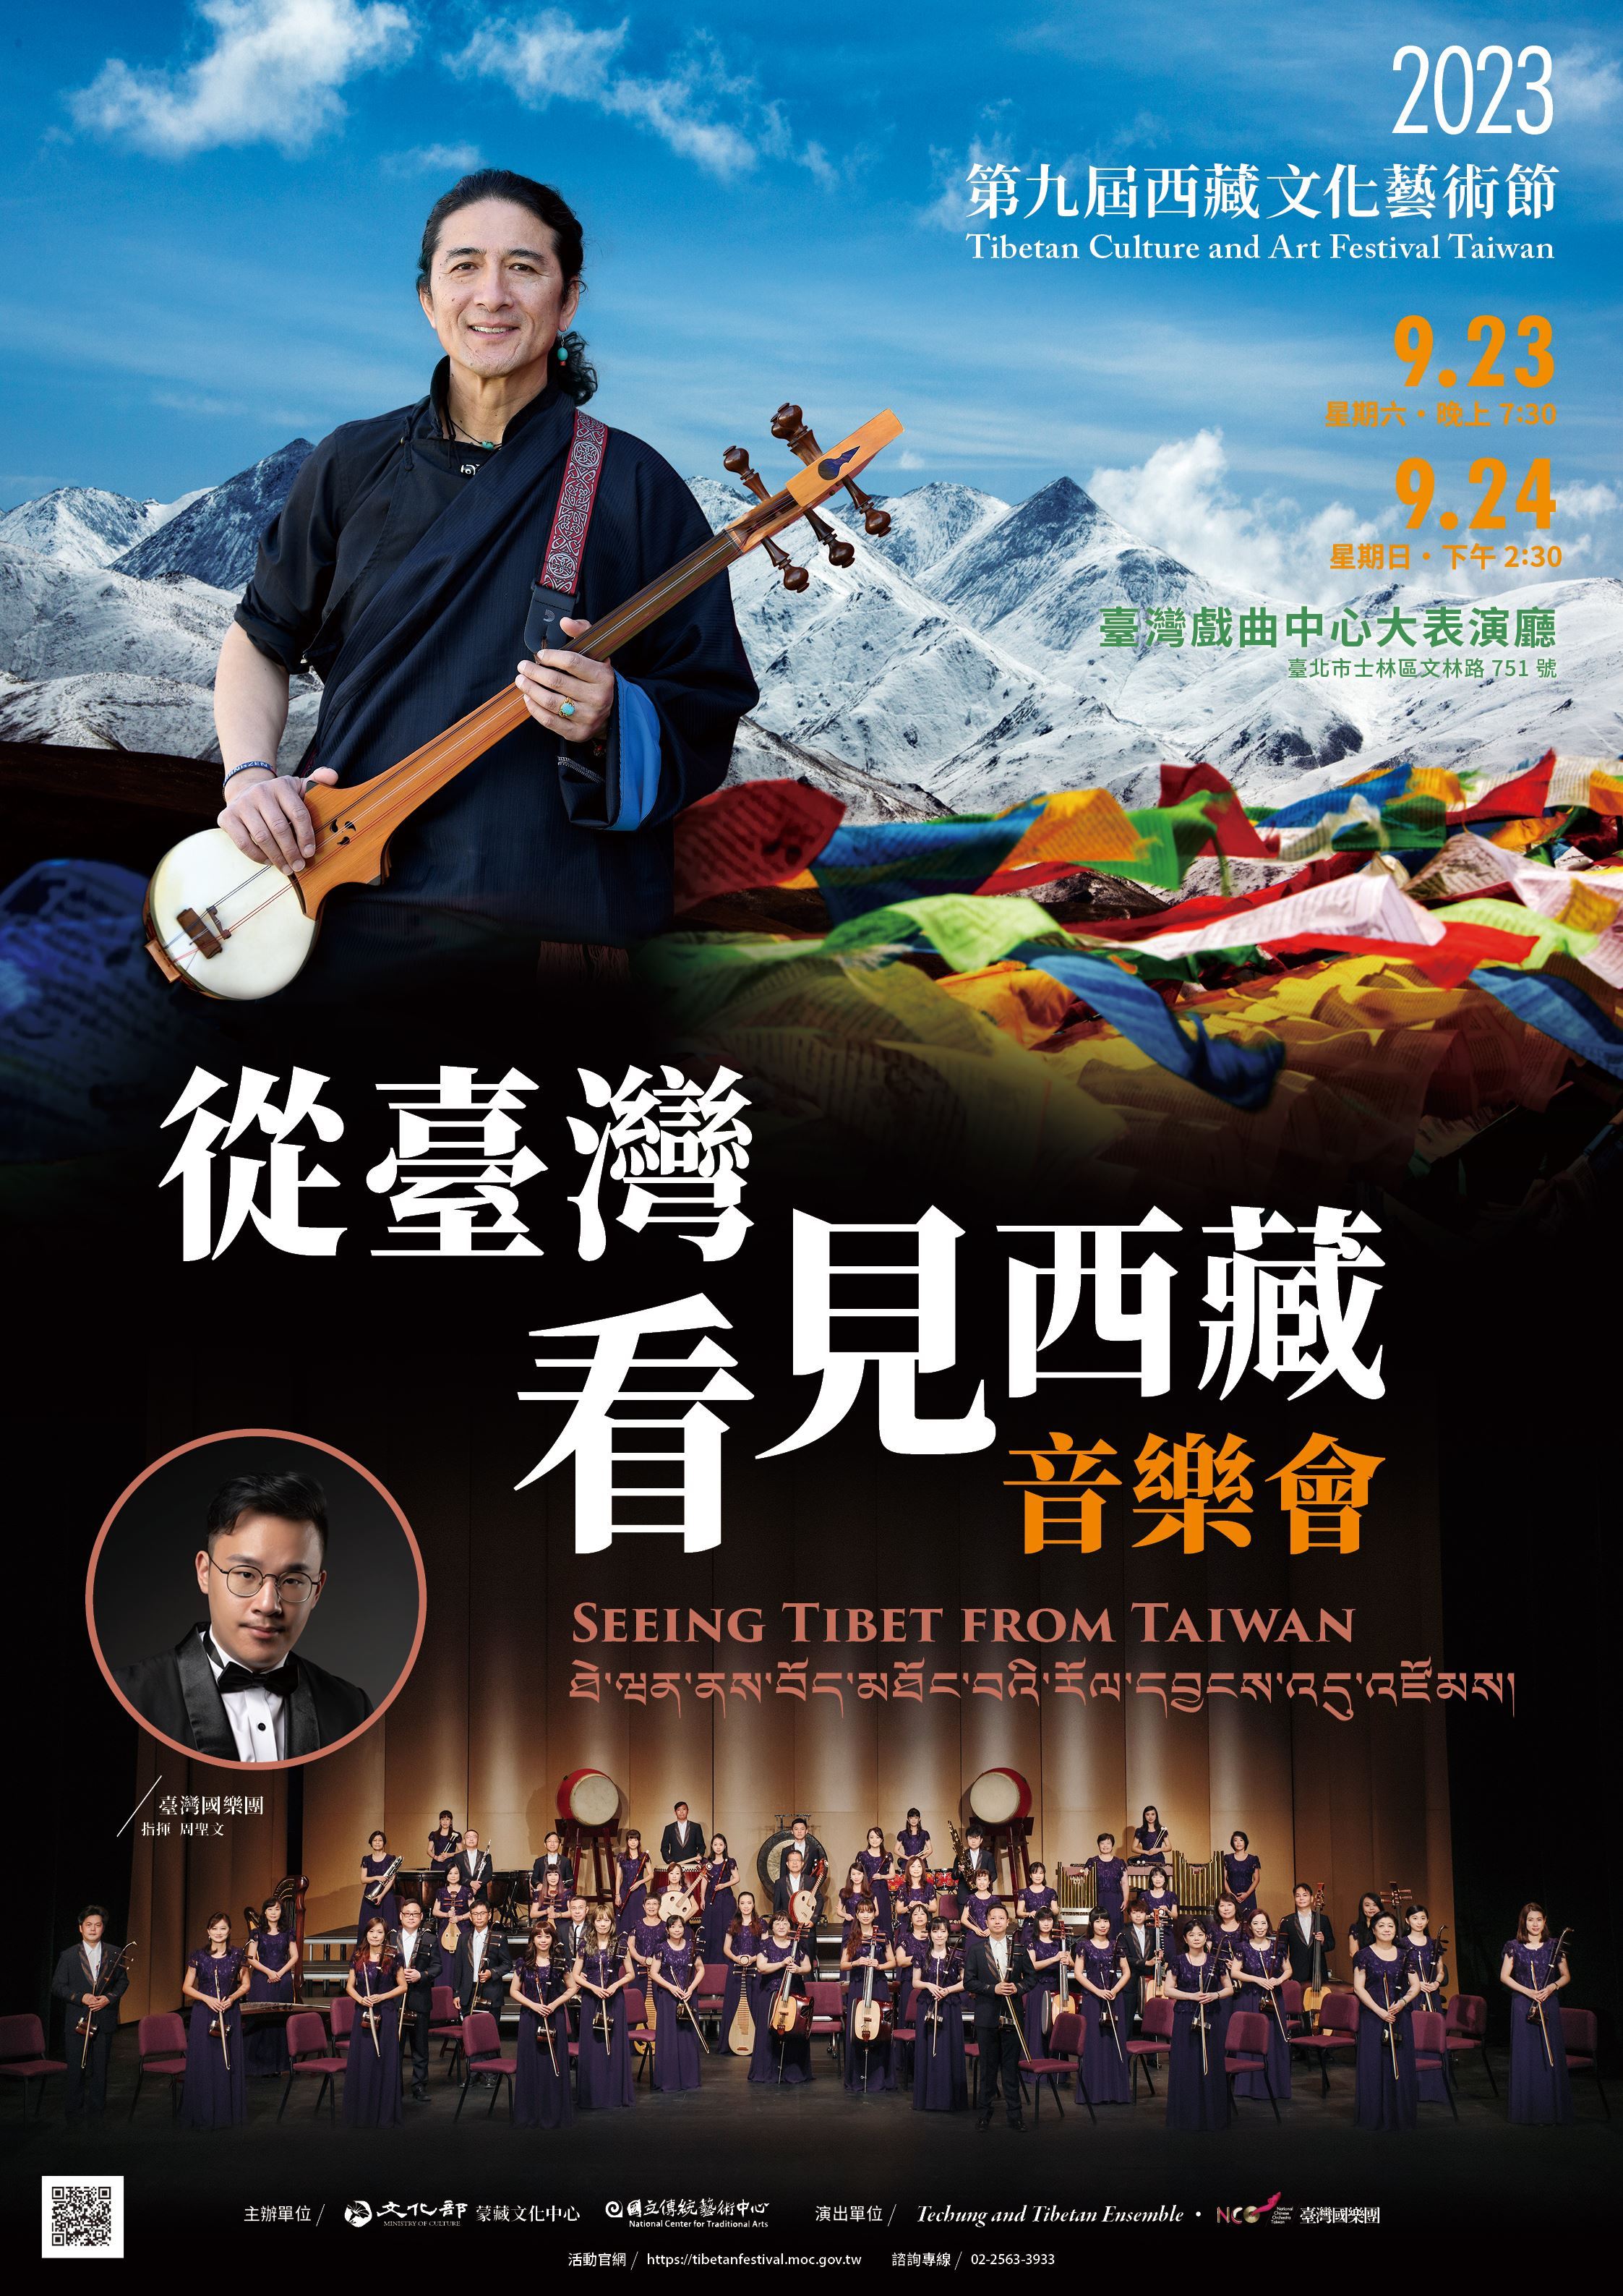 Tibetan Culture and Art Festival celebrates its 9th edition with free concert